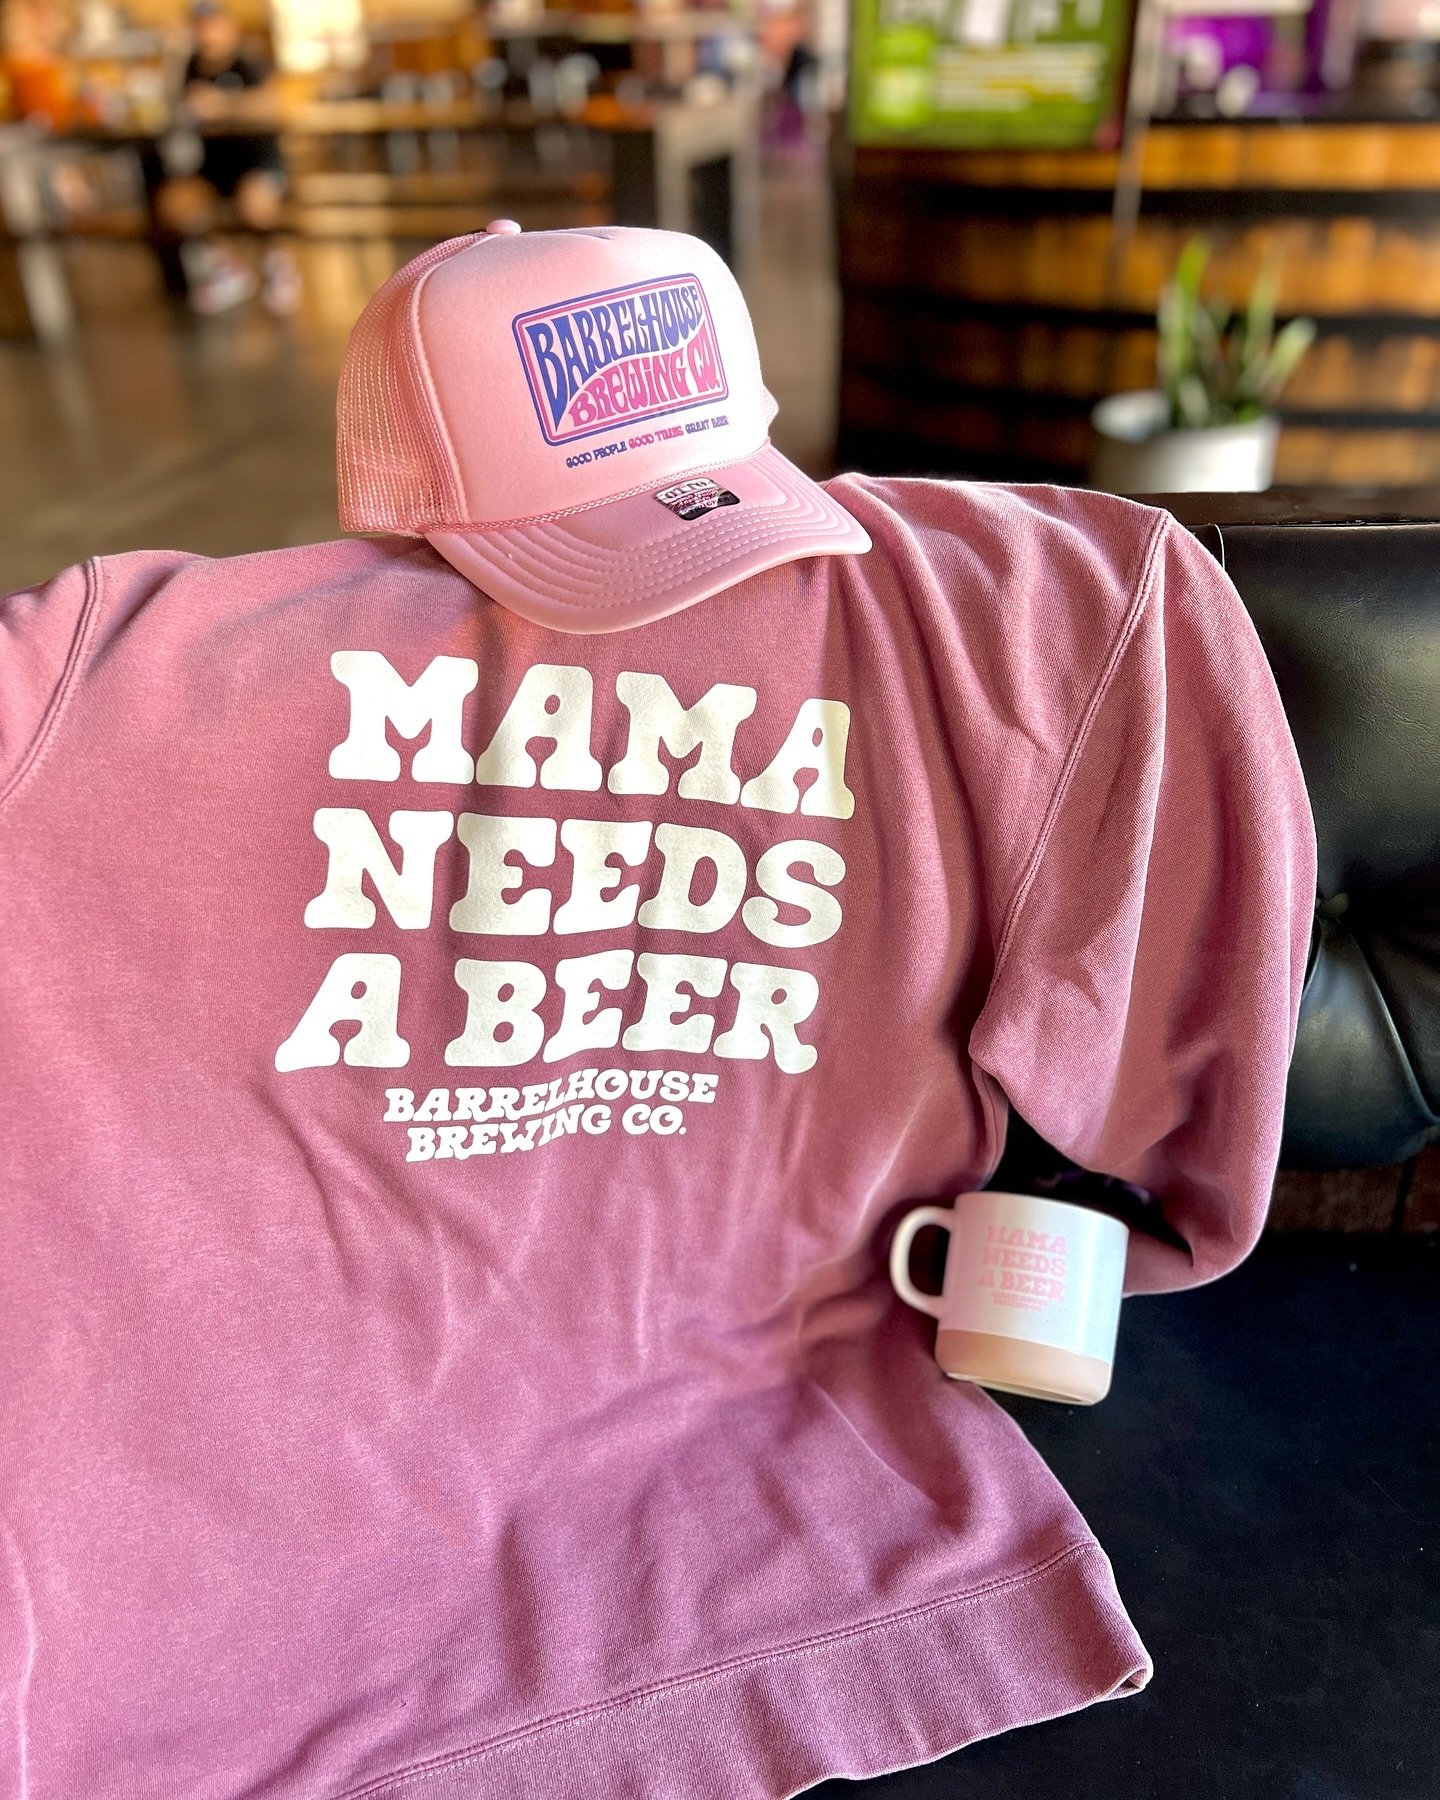 Not only does mama need a beer, she DESERVES a beer! 💕
Treat your mom to a beer and some mama merch!! 
Beer and live music today 🎶 
Cheers 🫶🏼
#goodpeoplegoodtimesgreatbeer